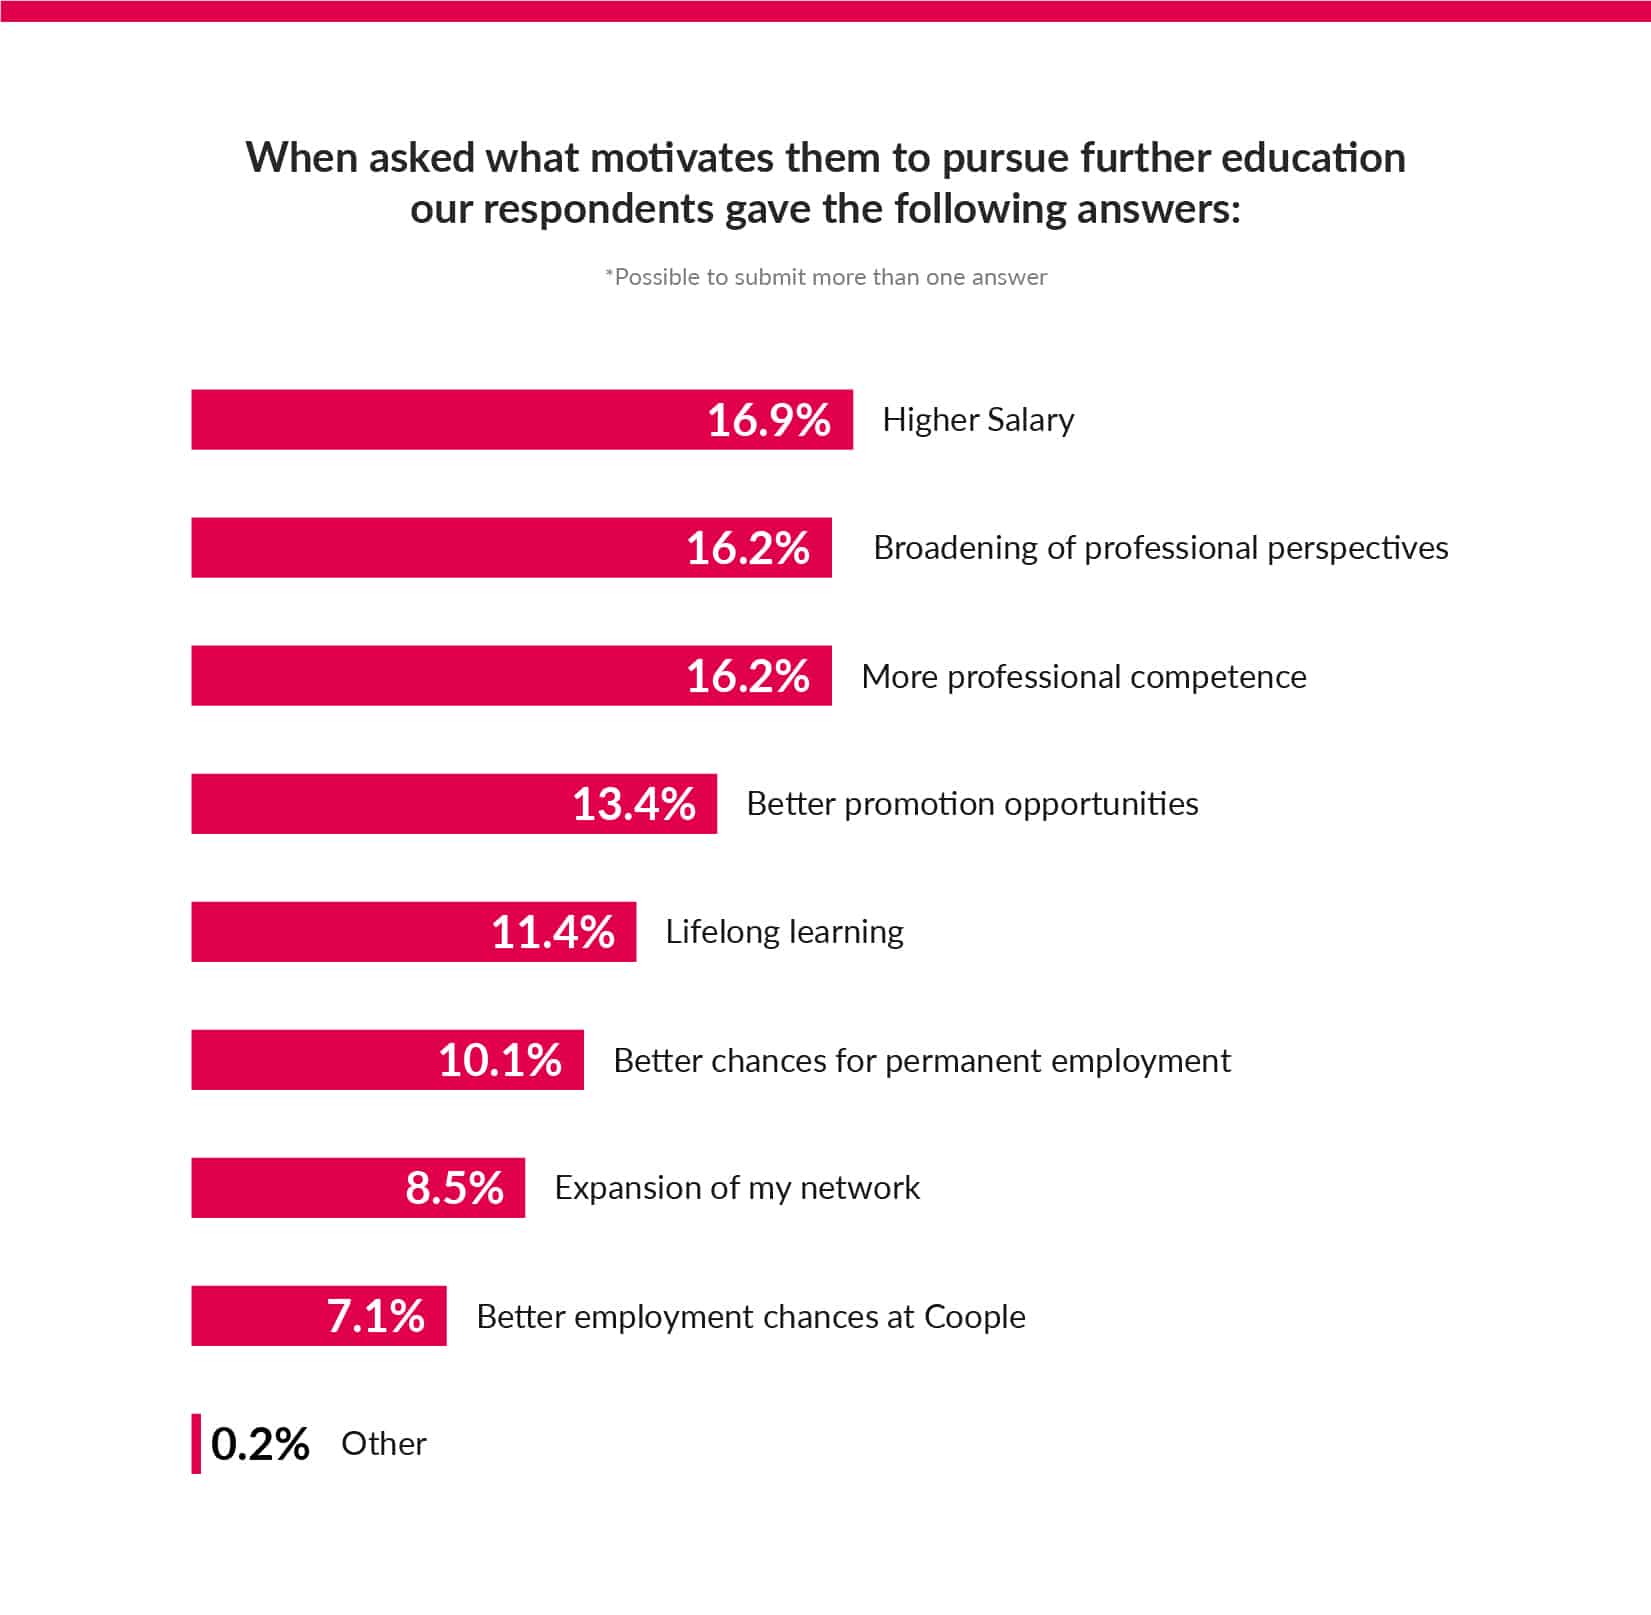 Graphic that shows the motivation for further education